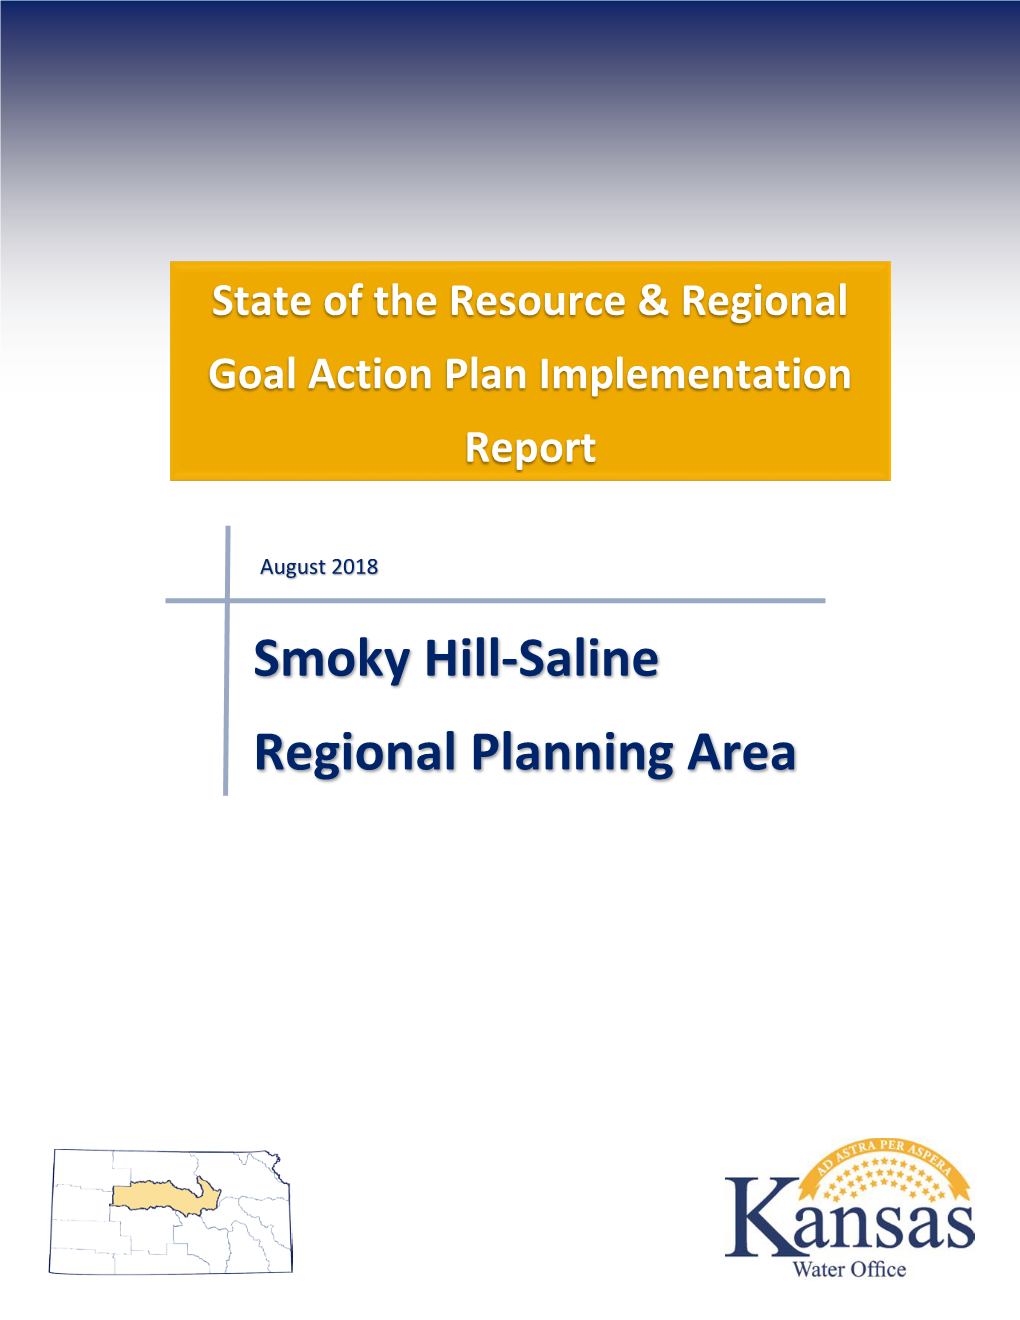 State of the Resource & Regional Goal Action Plan Implementation